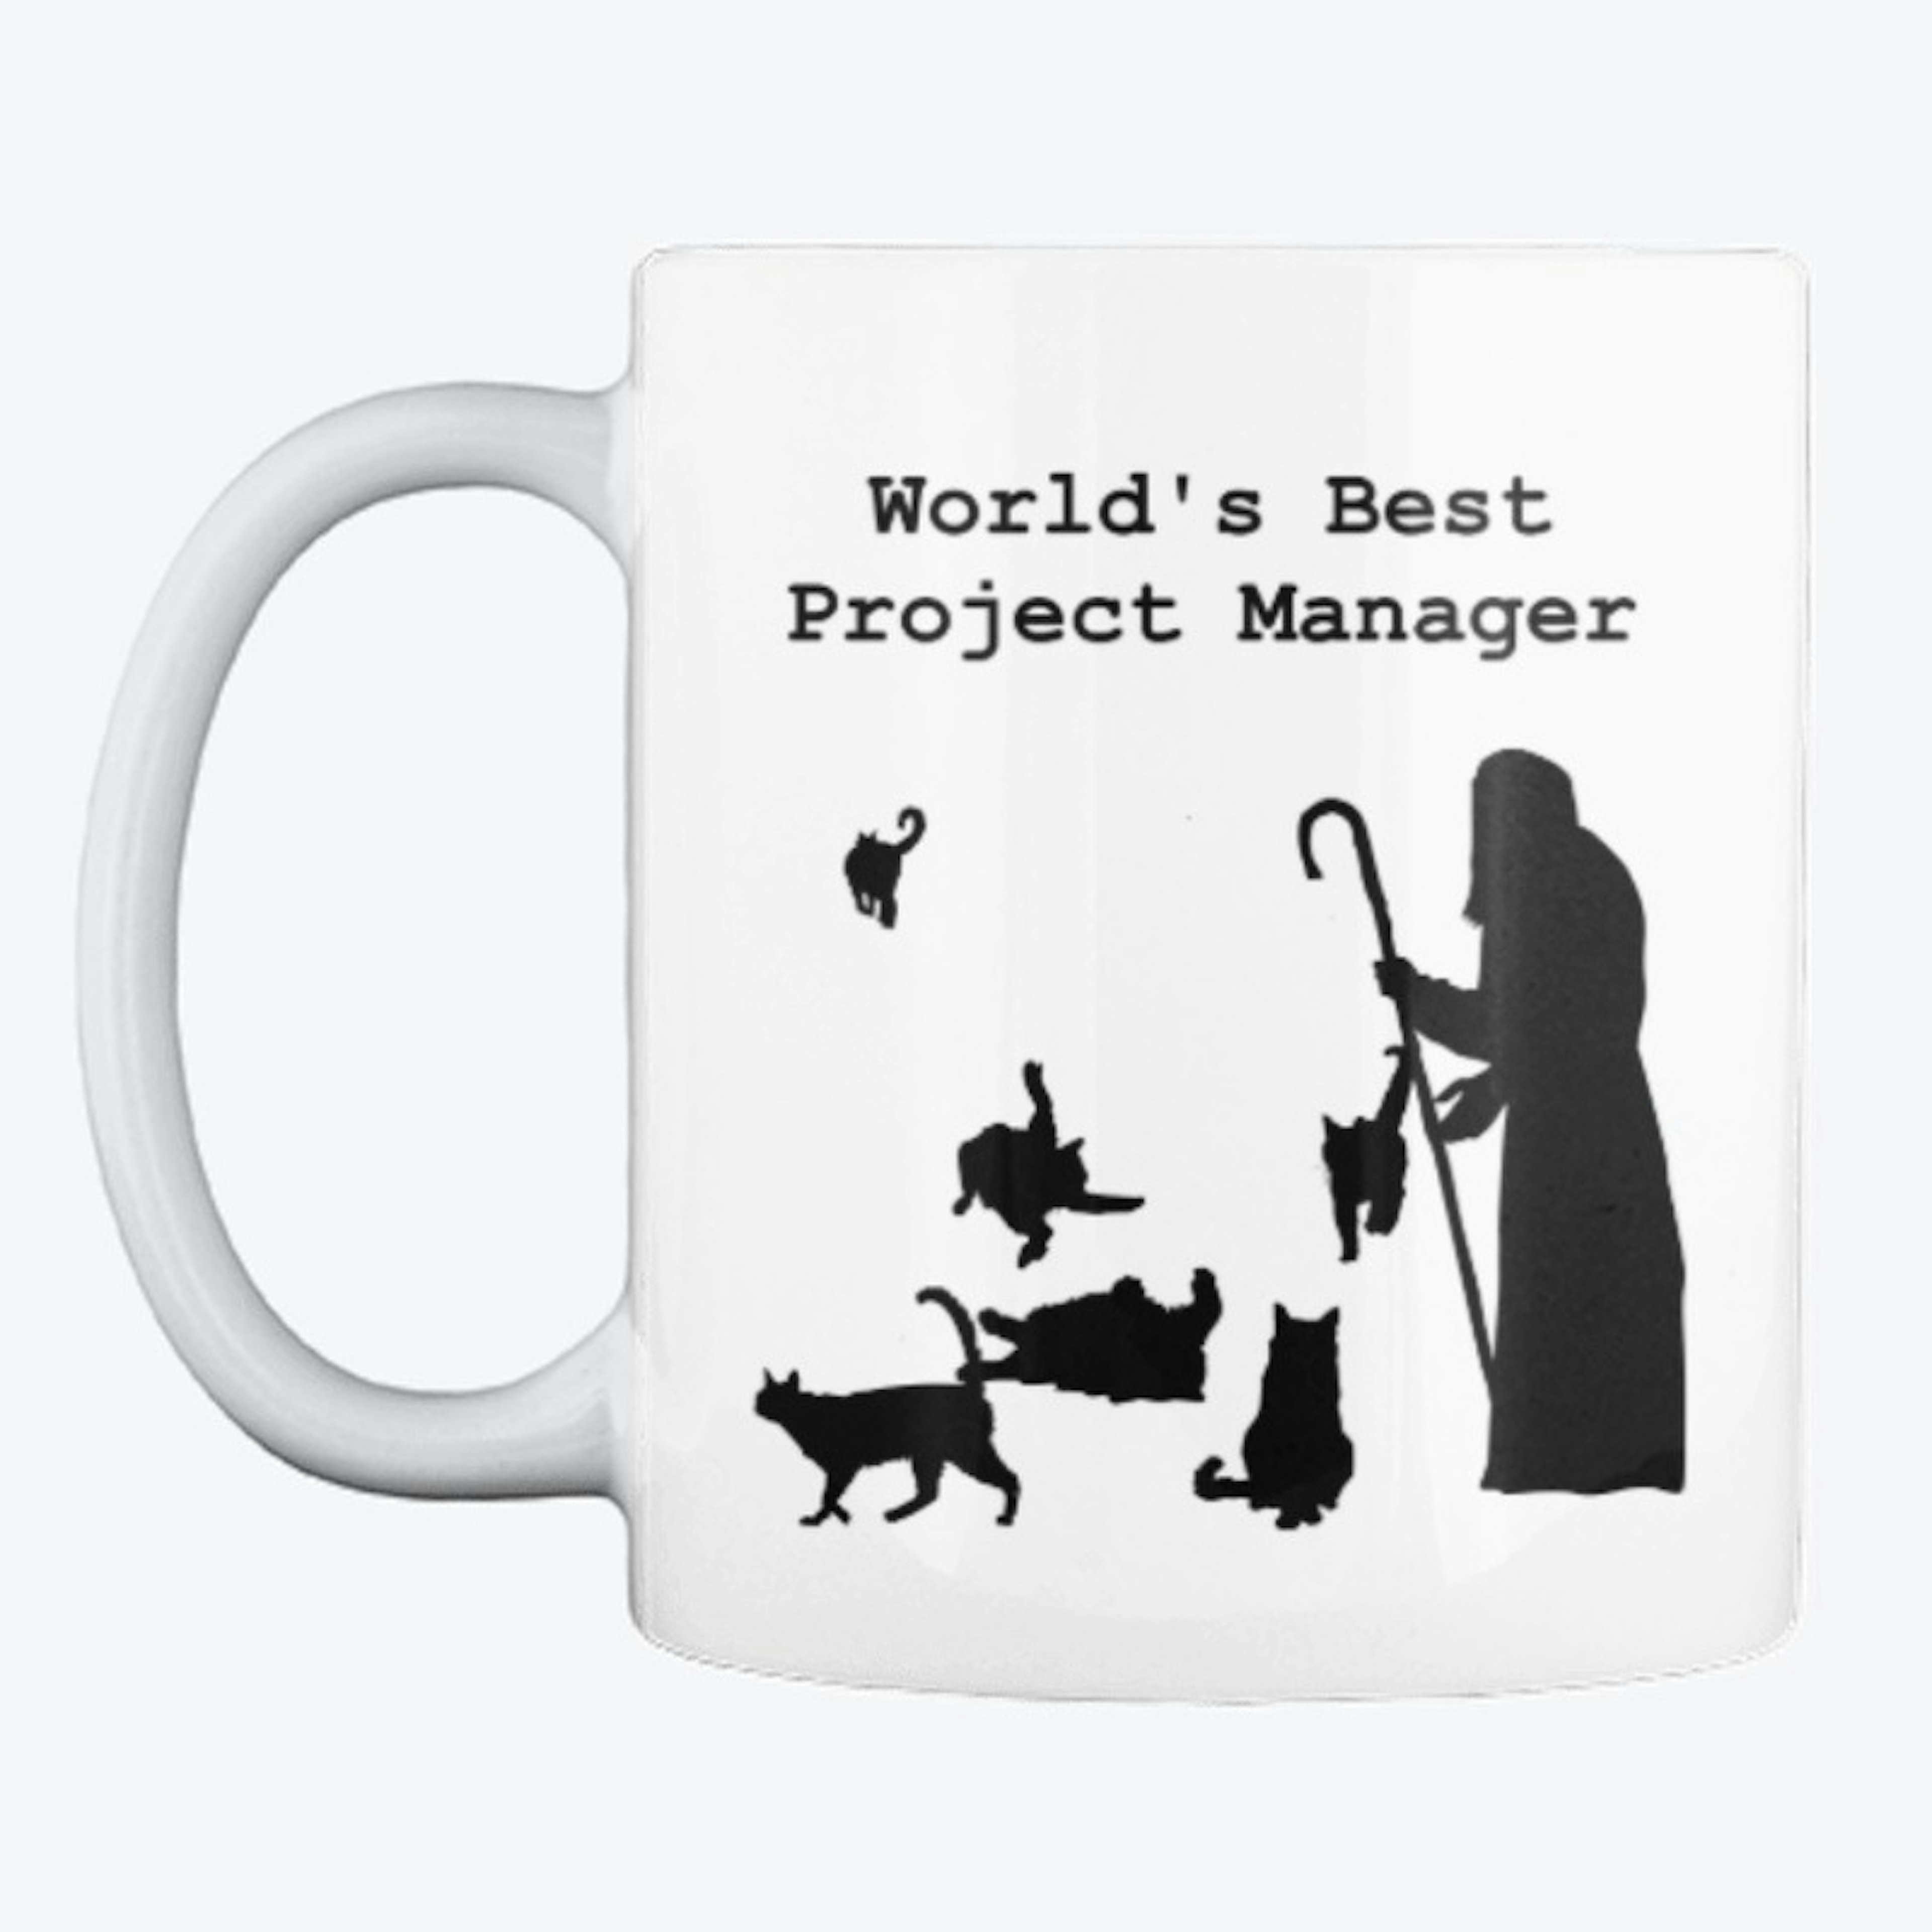 World's Best Project Manager